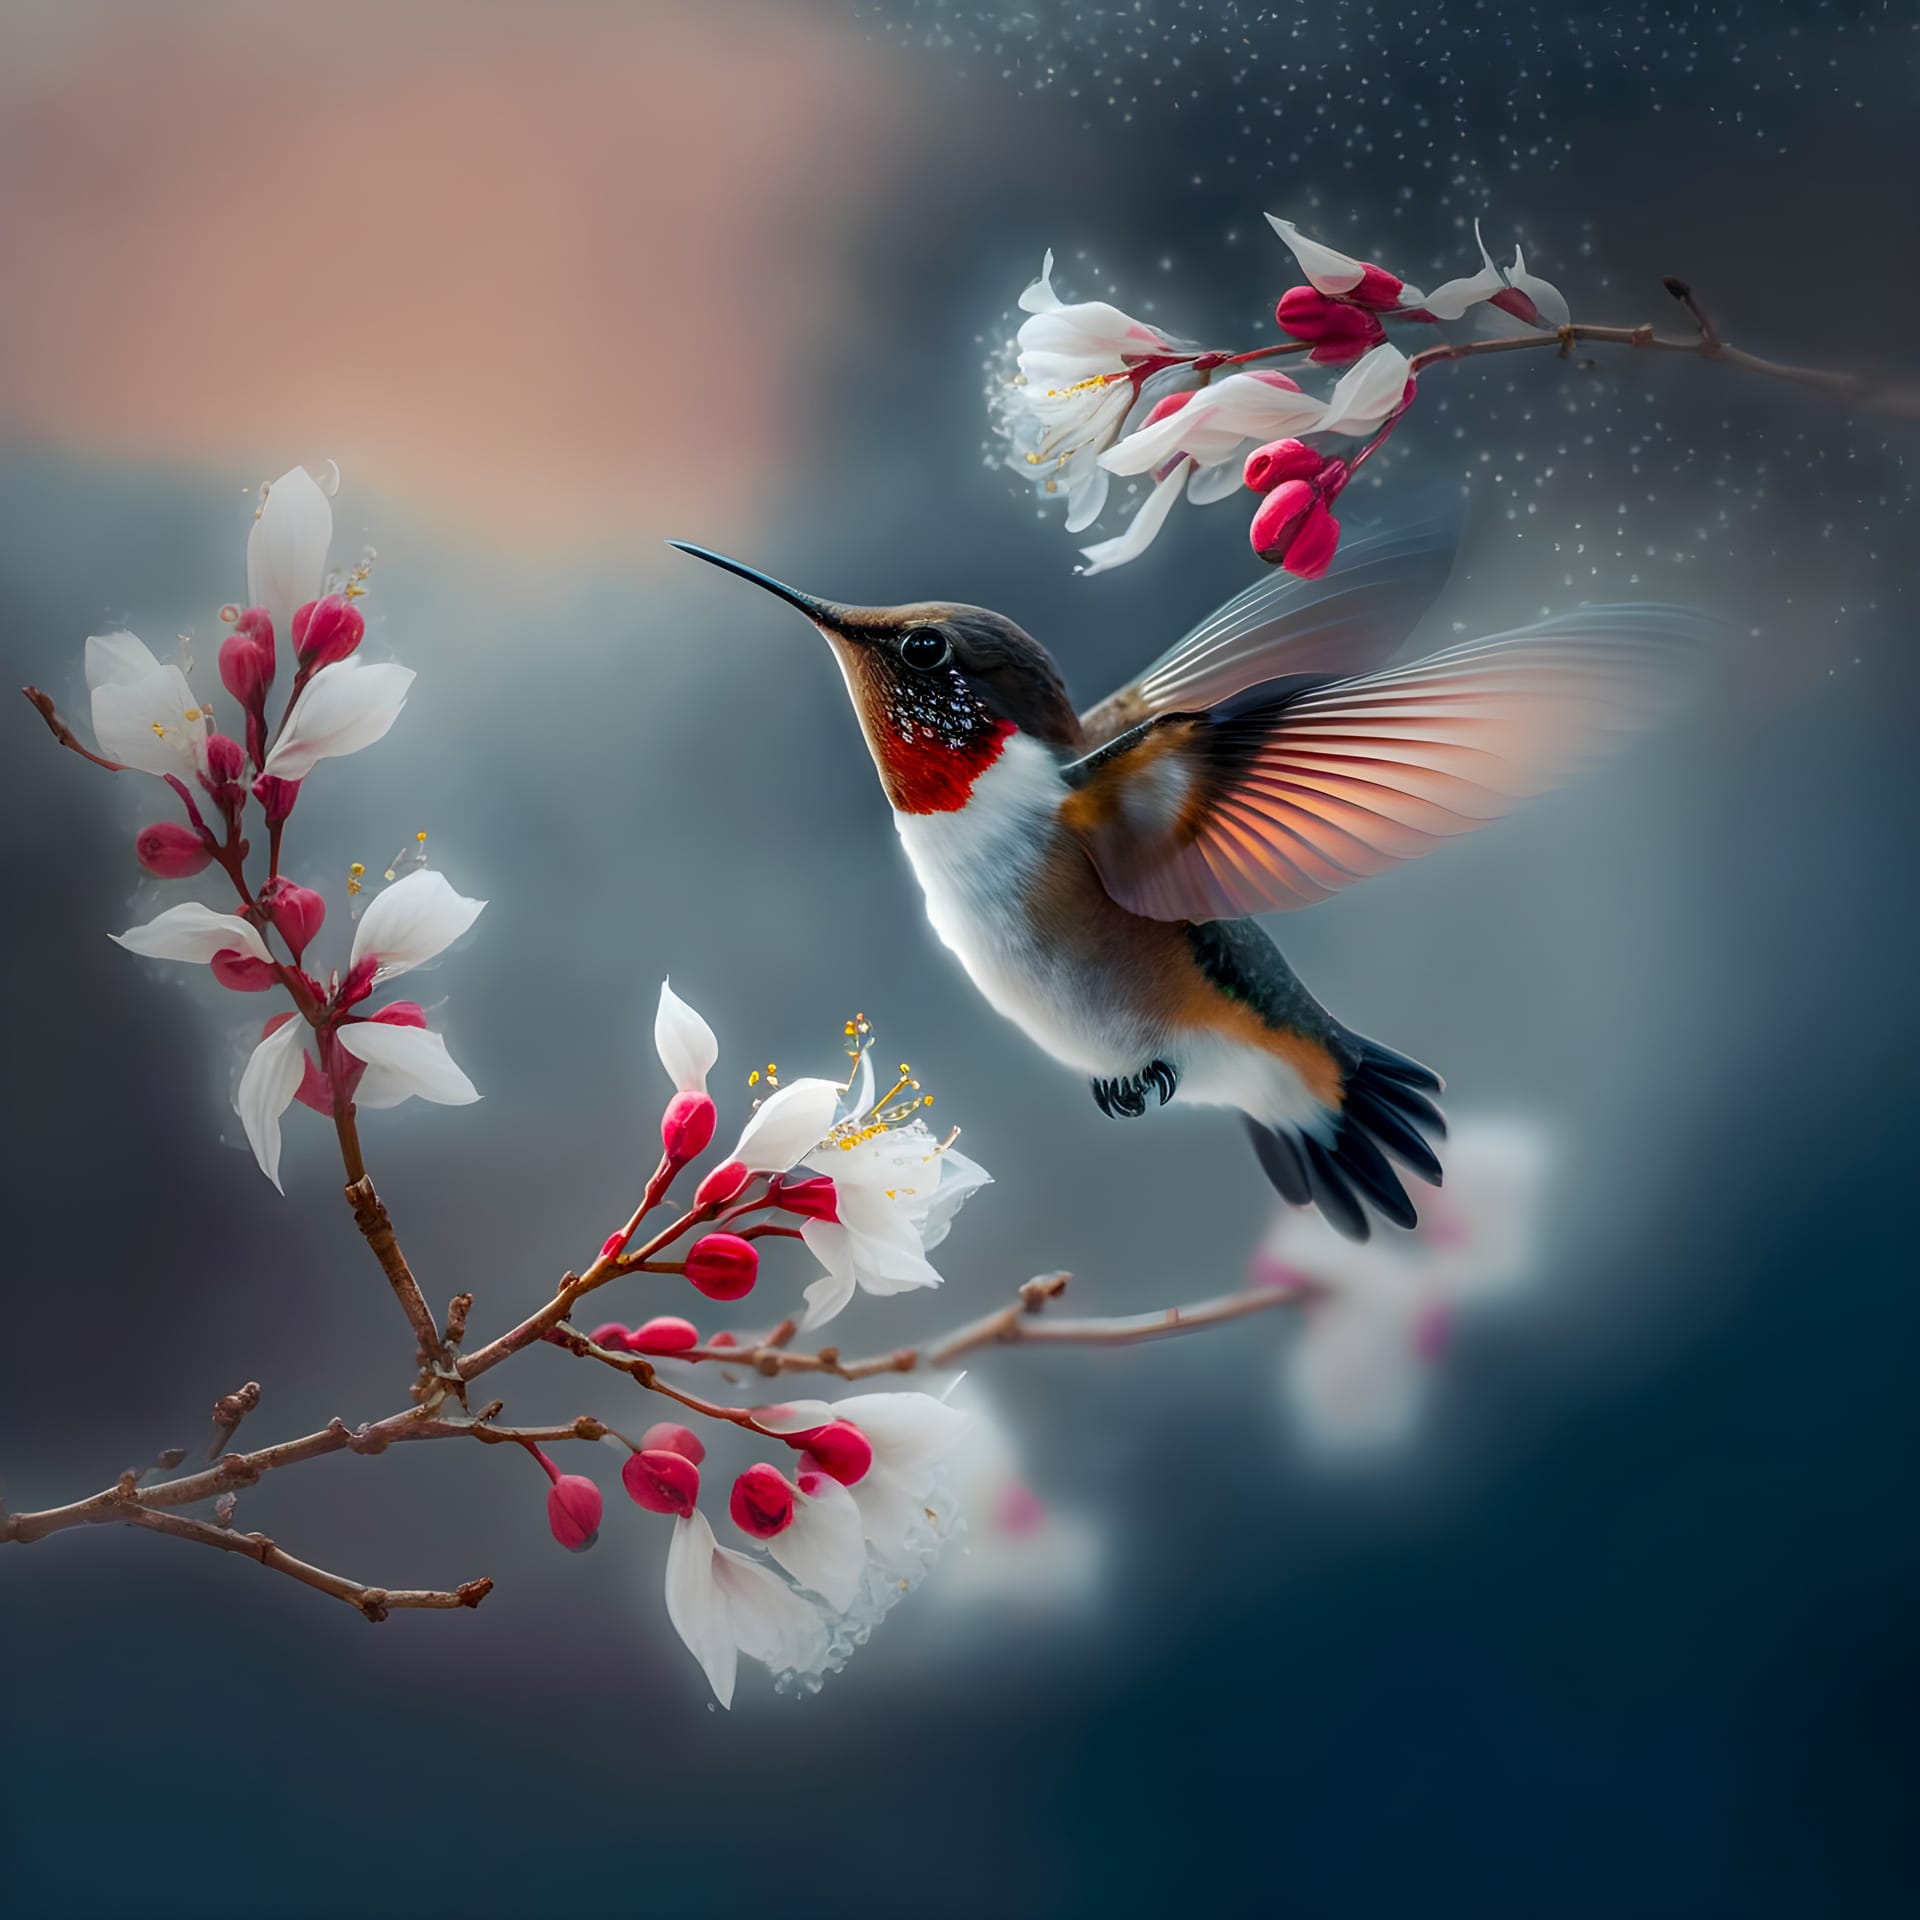 Hummingbird hovering branch gentle mistyr white red cherry blossom picture